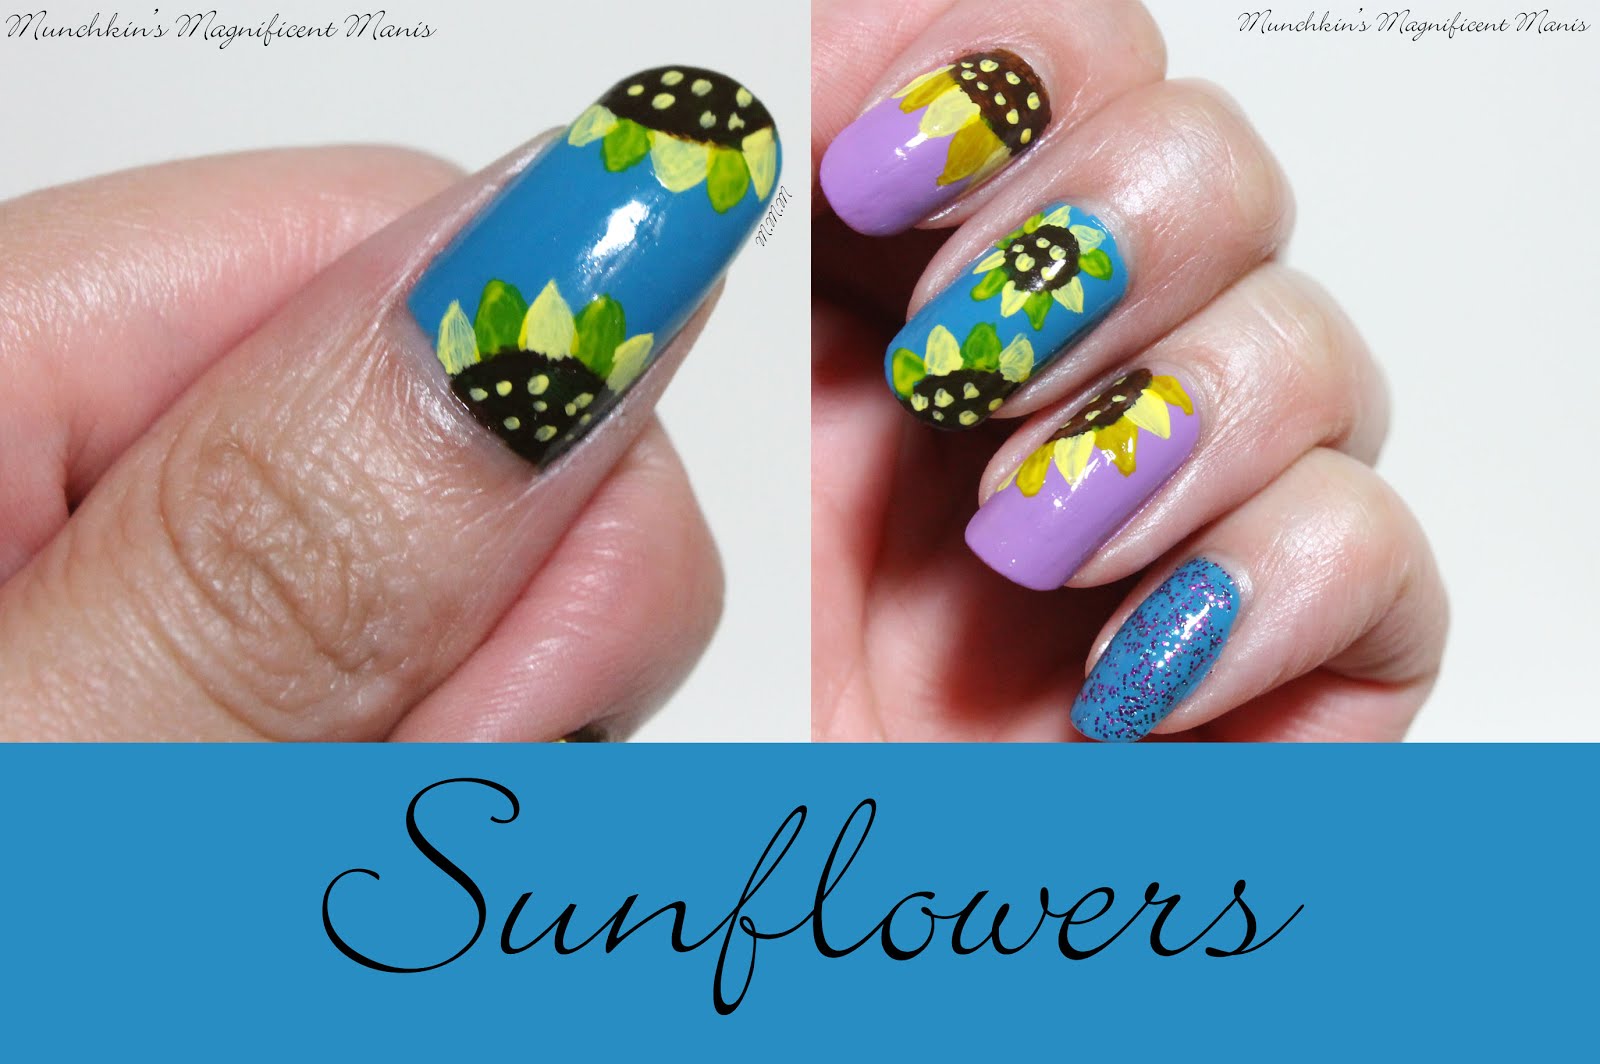 5. "Sunflower Nail Design for a Fun and Playful Summer Look" - wide 4